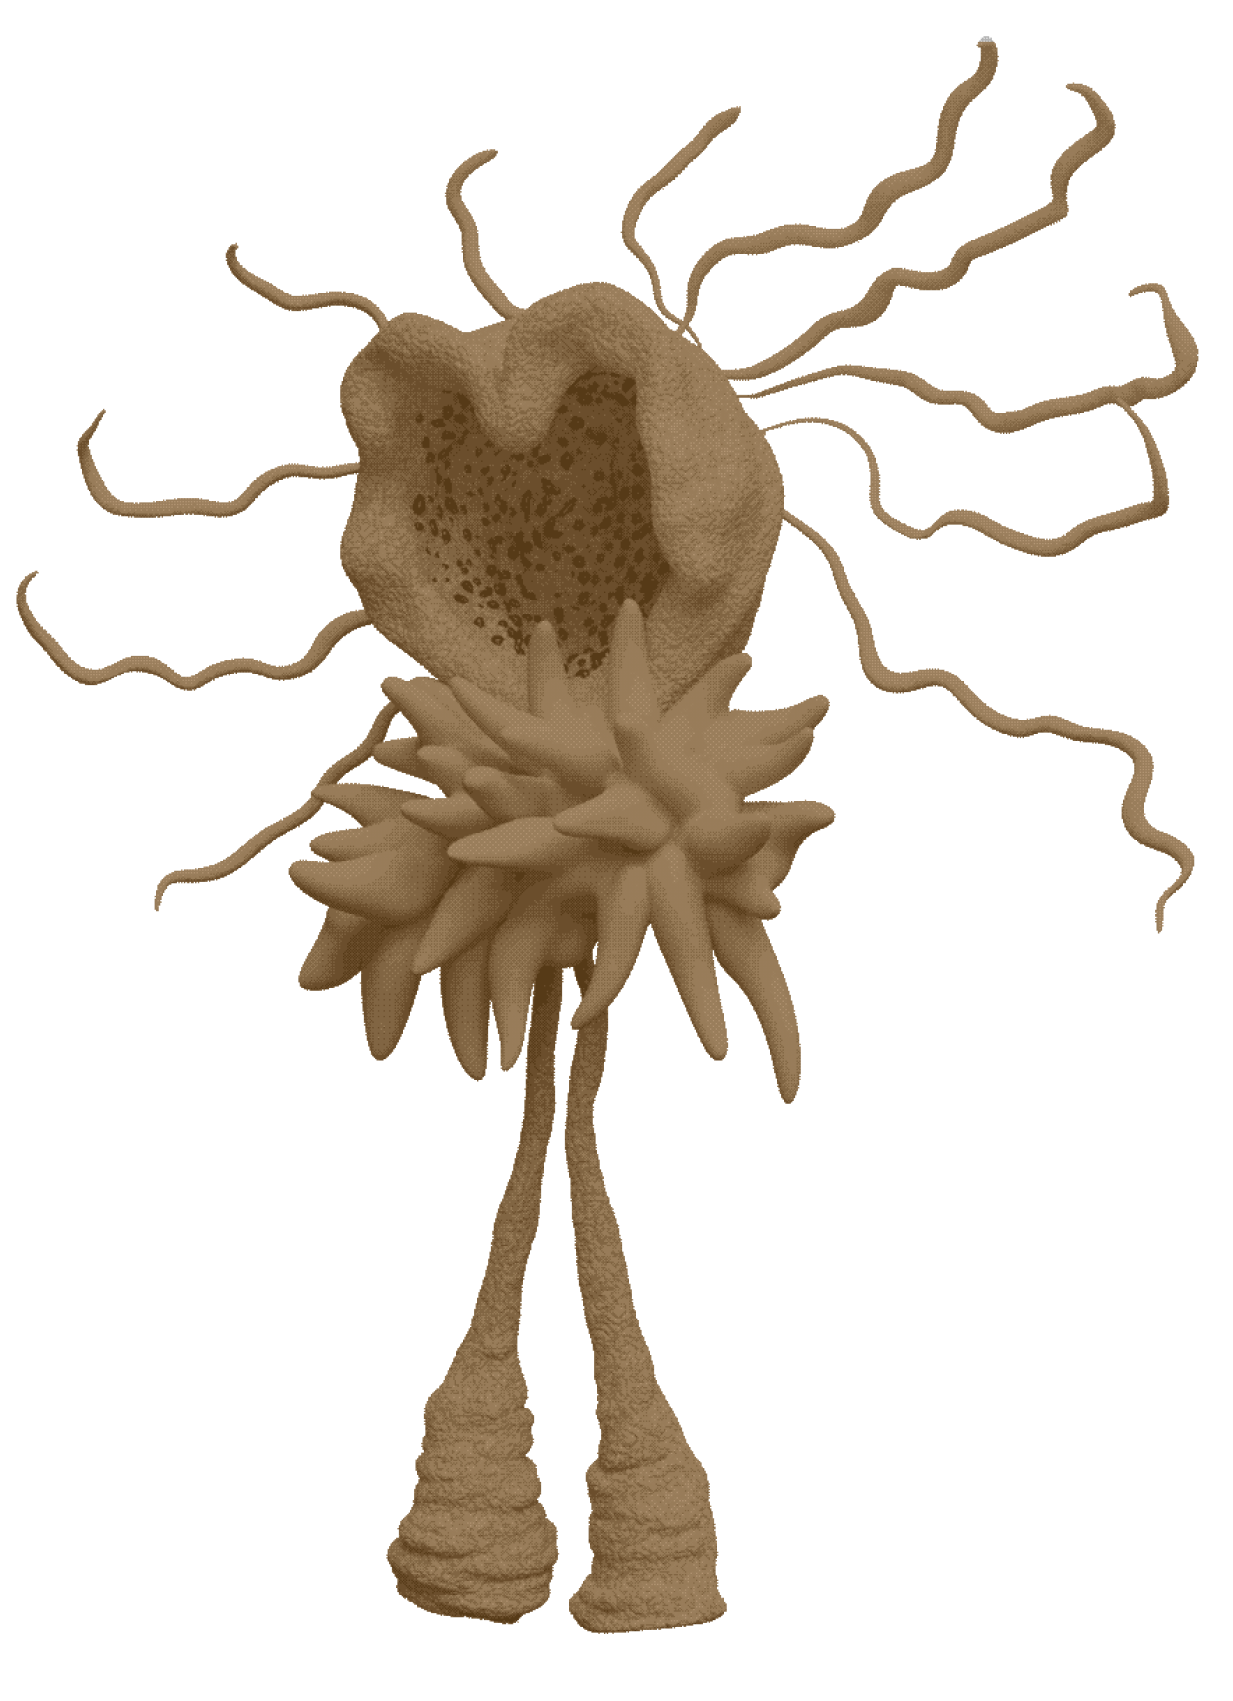 A creature with long legs with no feet, spikes for hands and instead of a face it has a heart-shaped opening to a hollow shell. From the back of its head tentacles stick out like hair.